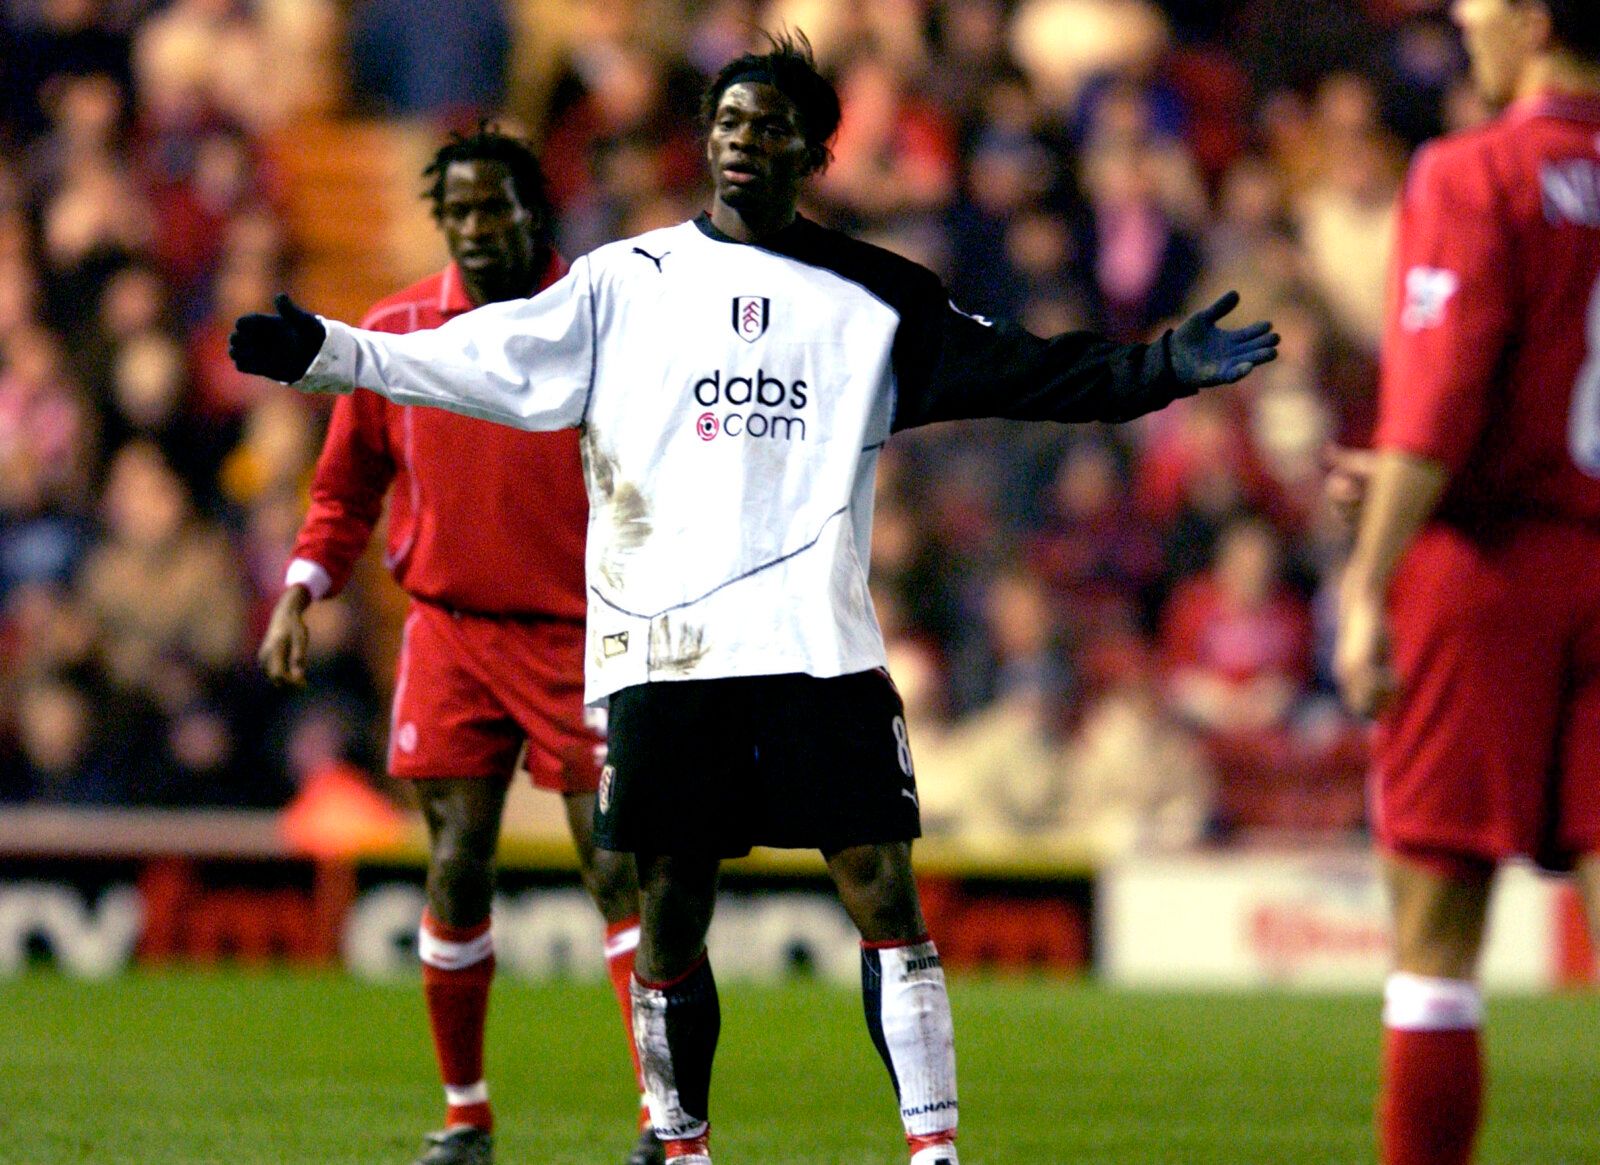 Football - FA Barclaycard Premiership - Middlesbrough v Fulham - 7/01/04 
Fulham's Louis Saha in action 
Mandatory Credit : Action Images / John Sibley